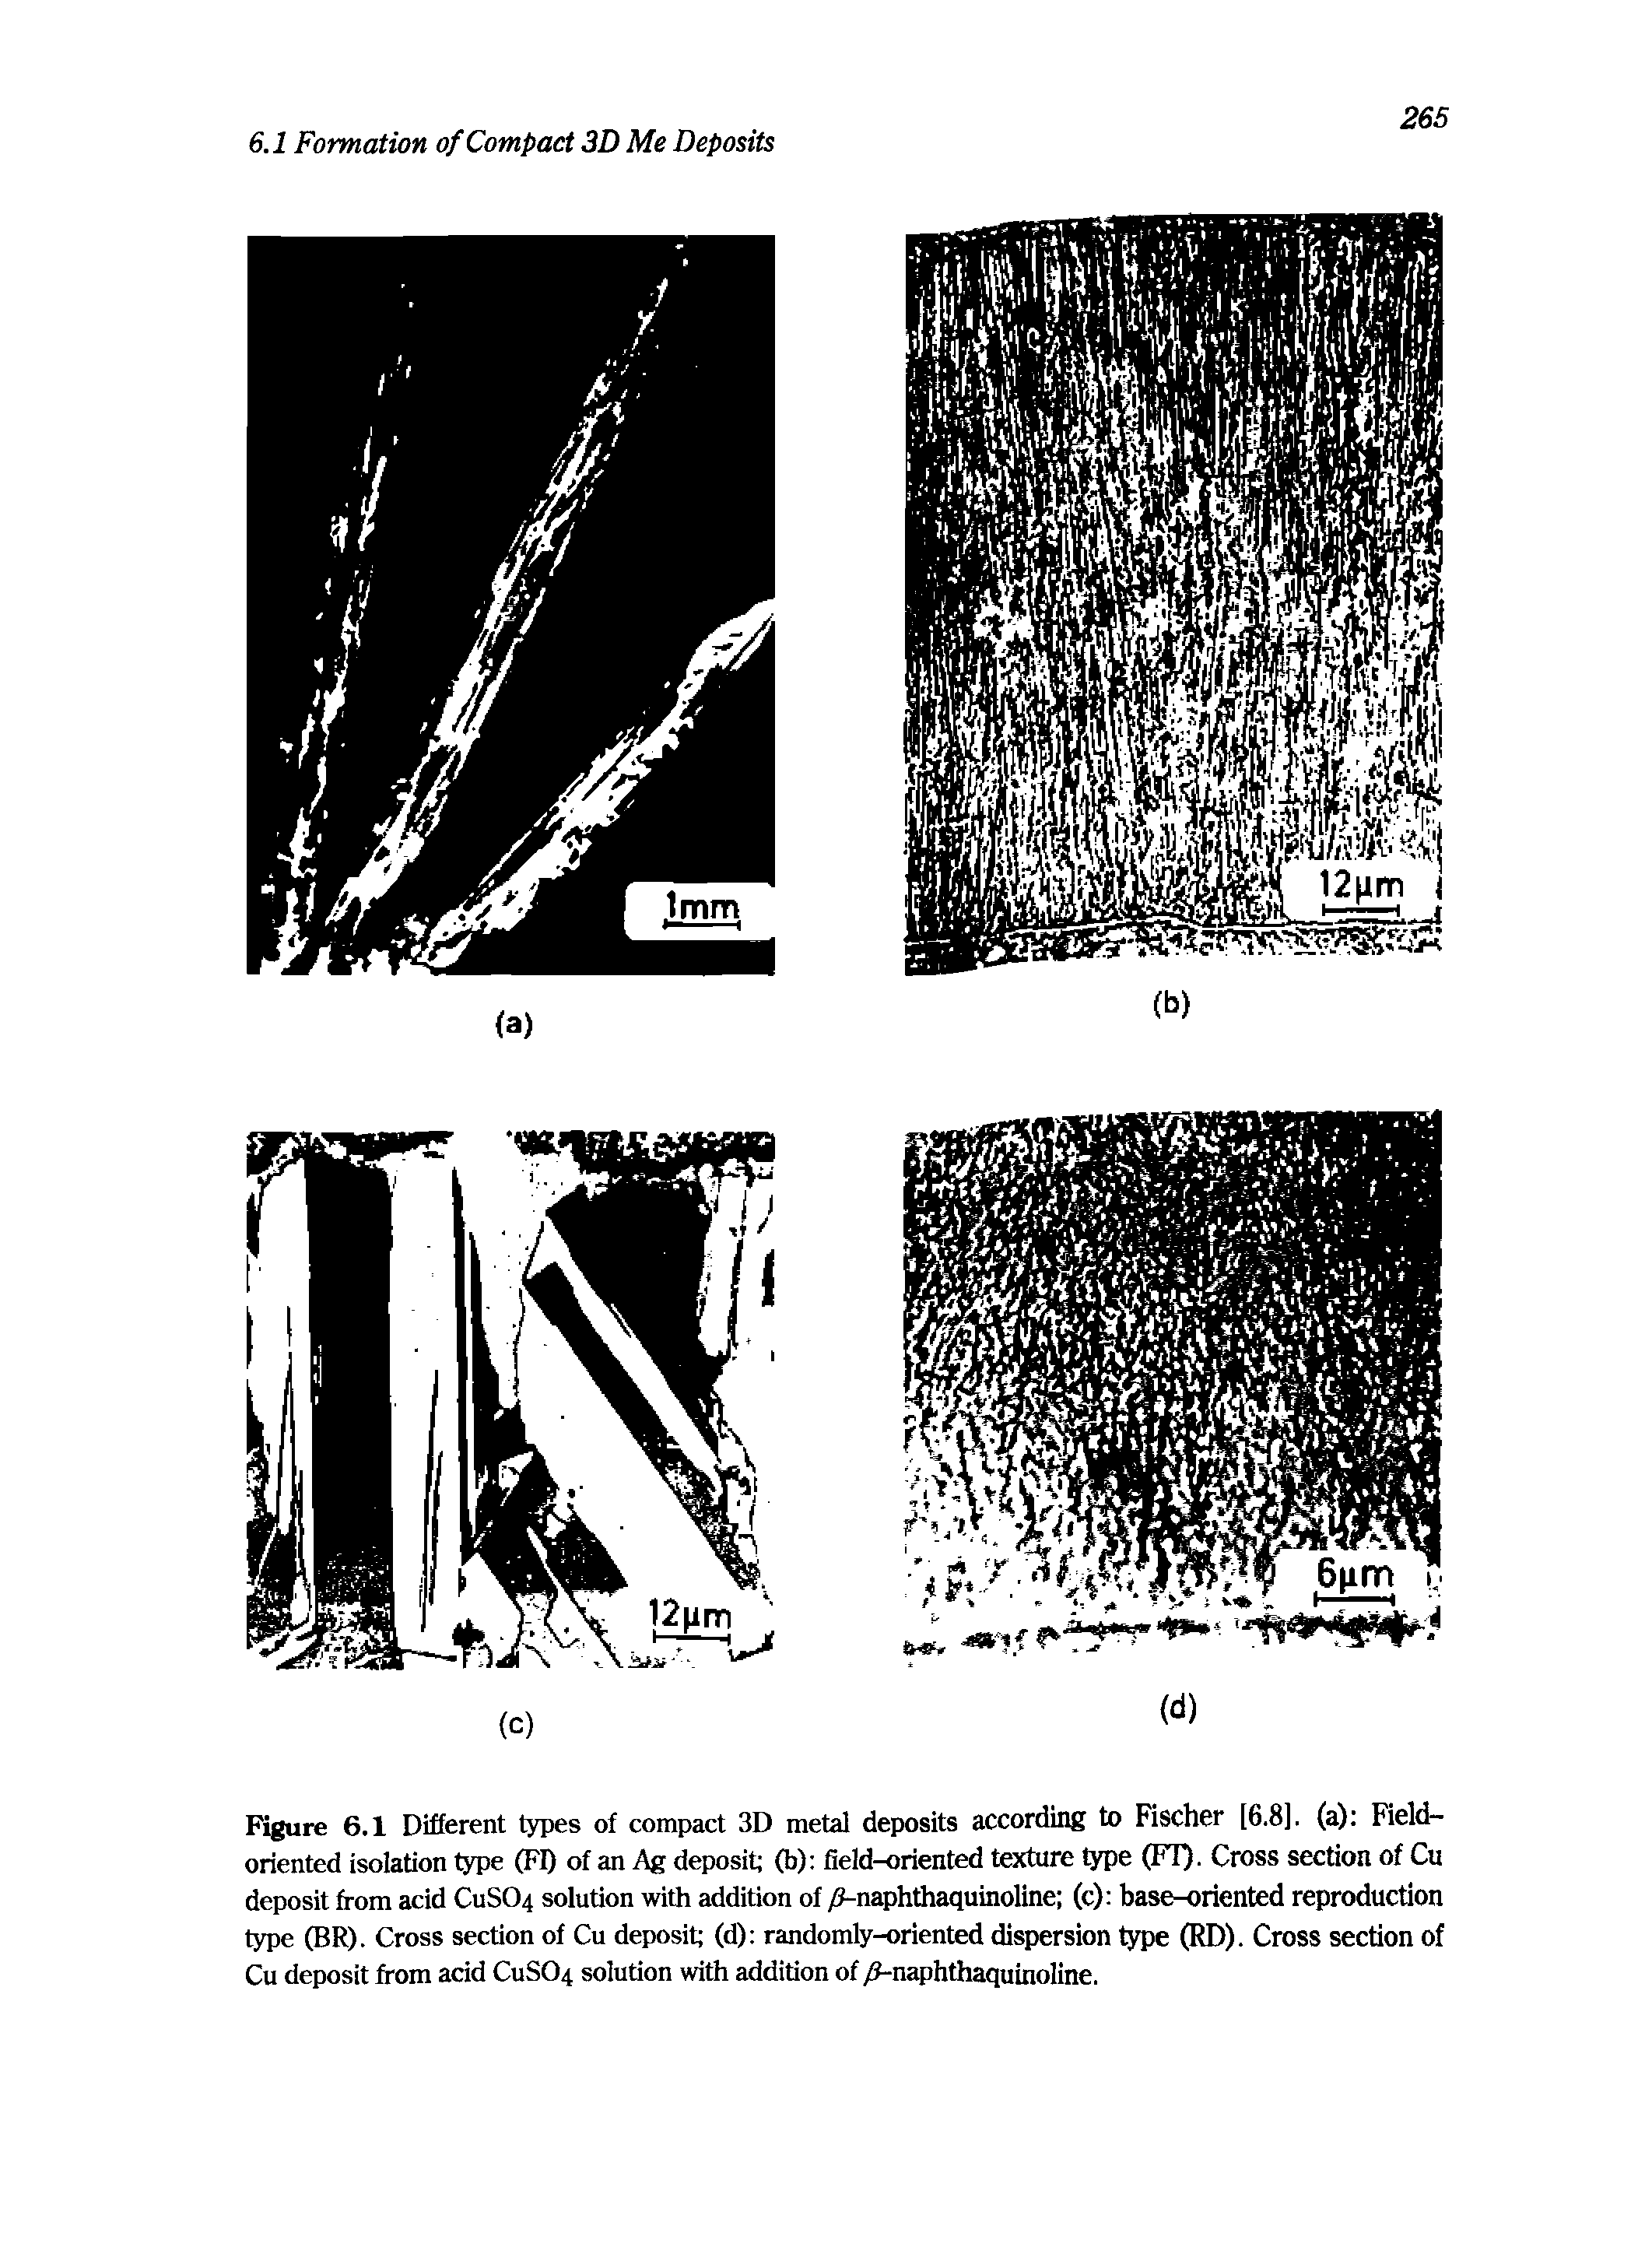 Figure 6.1 Different types of compact 3D metal deposits according to Fischer [6.8]. (a) Field-oriented isolation type (FI) of an Ag deposit (b) field-oriented texture type (FT). Cross section of Cu deposit from acid CUSO4 solution with addition of /5-naphthaquinoline (c) base-oriented reproduction type (BR). Cross section of Cu deposit (d) randomly-oriented dispersion type (RD). Cross section of Cu deposit from acid CuSO solution with addition of naphthaquinoline.